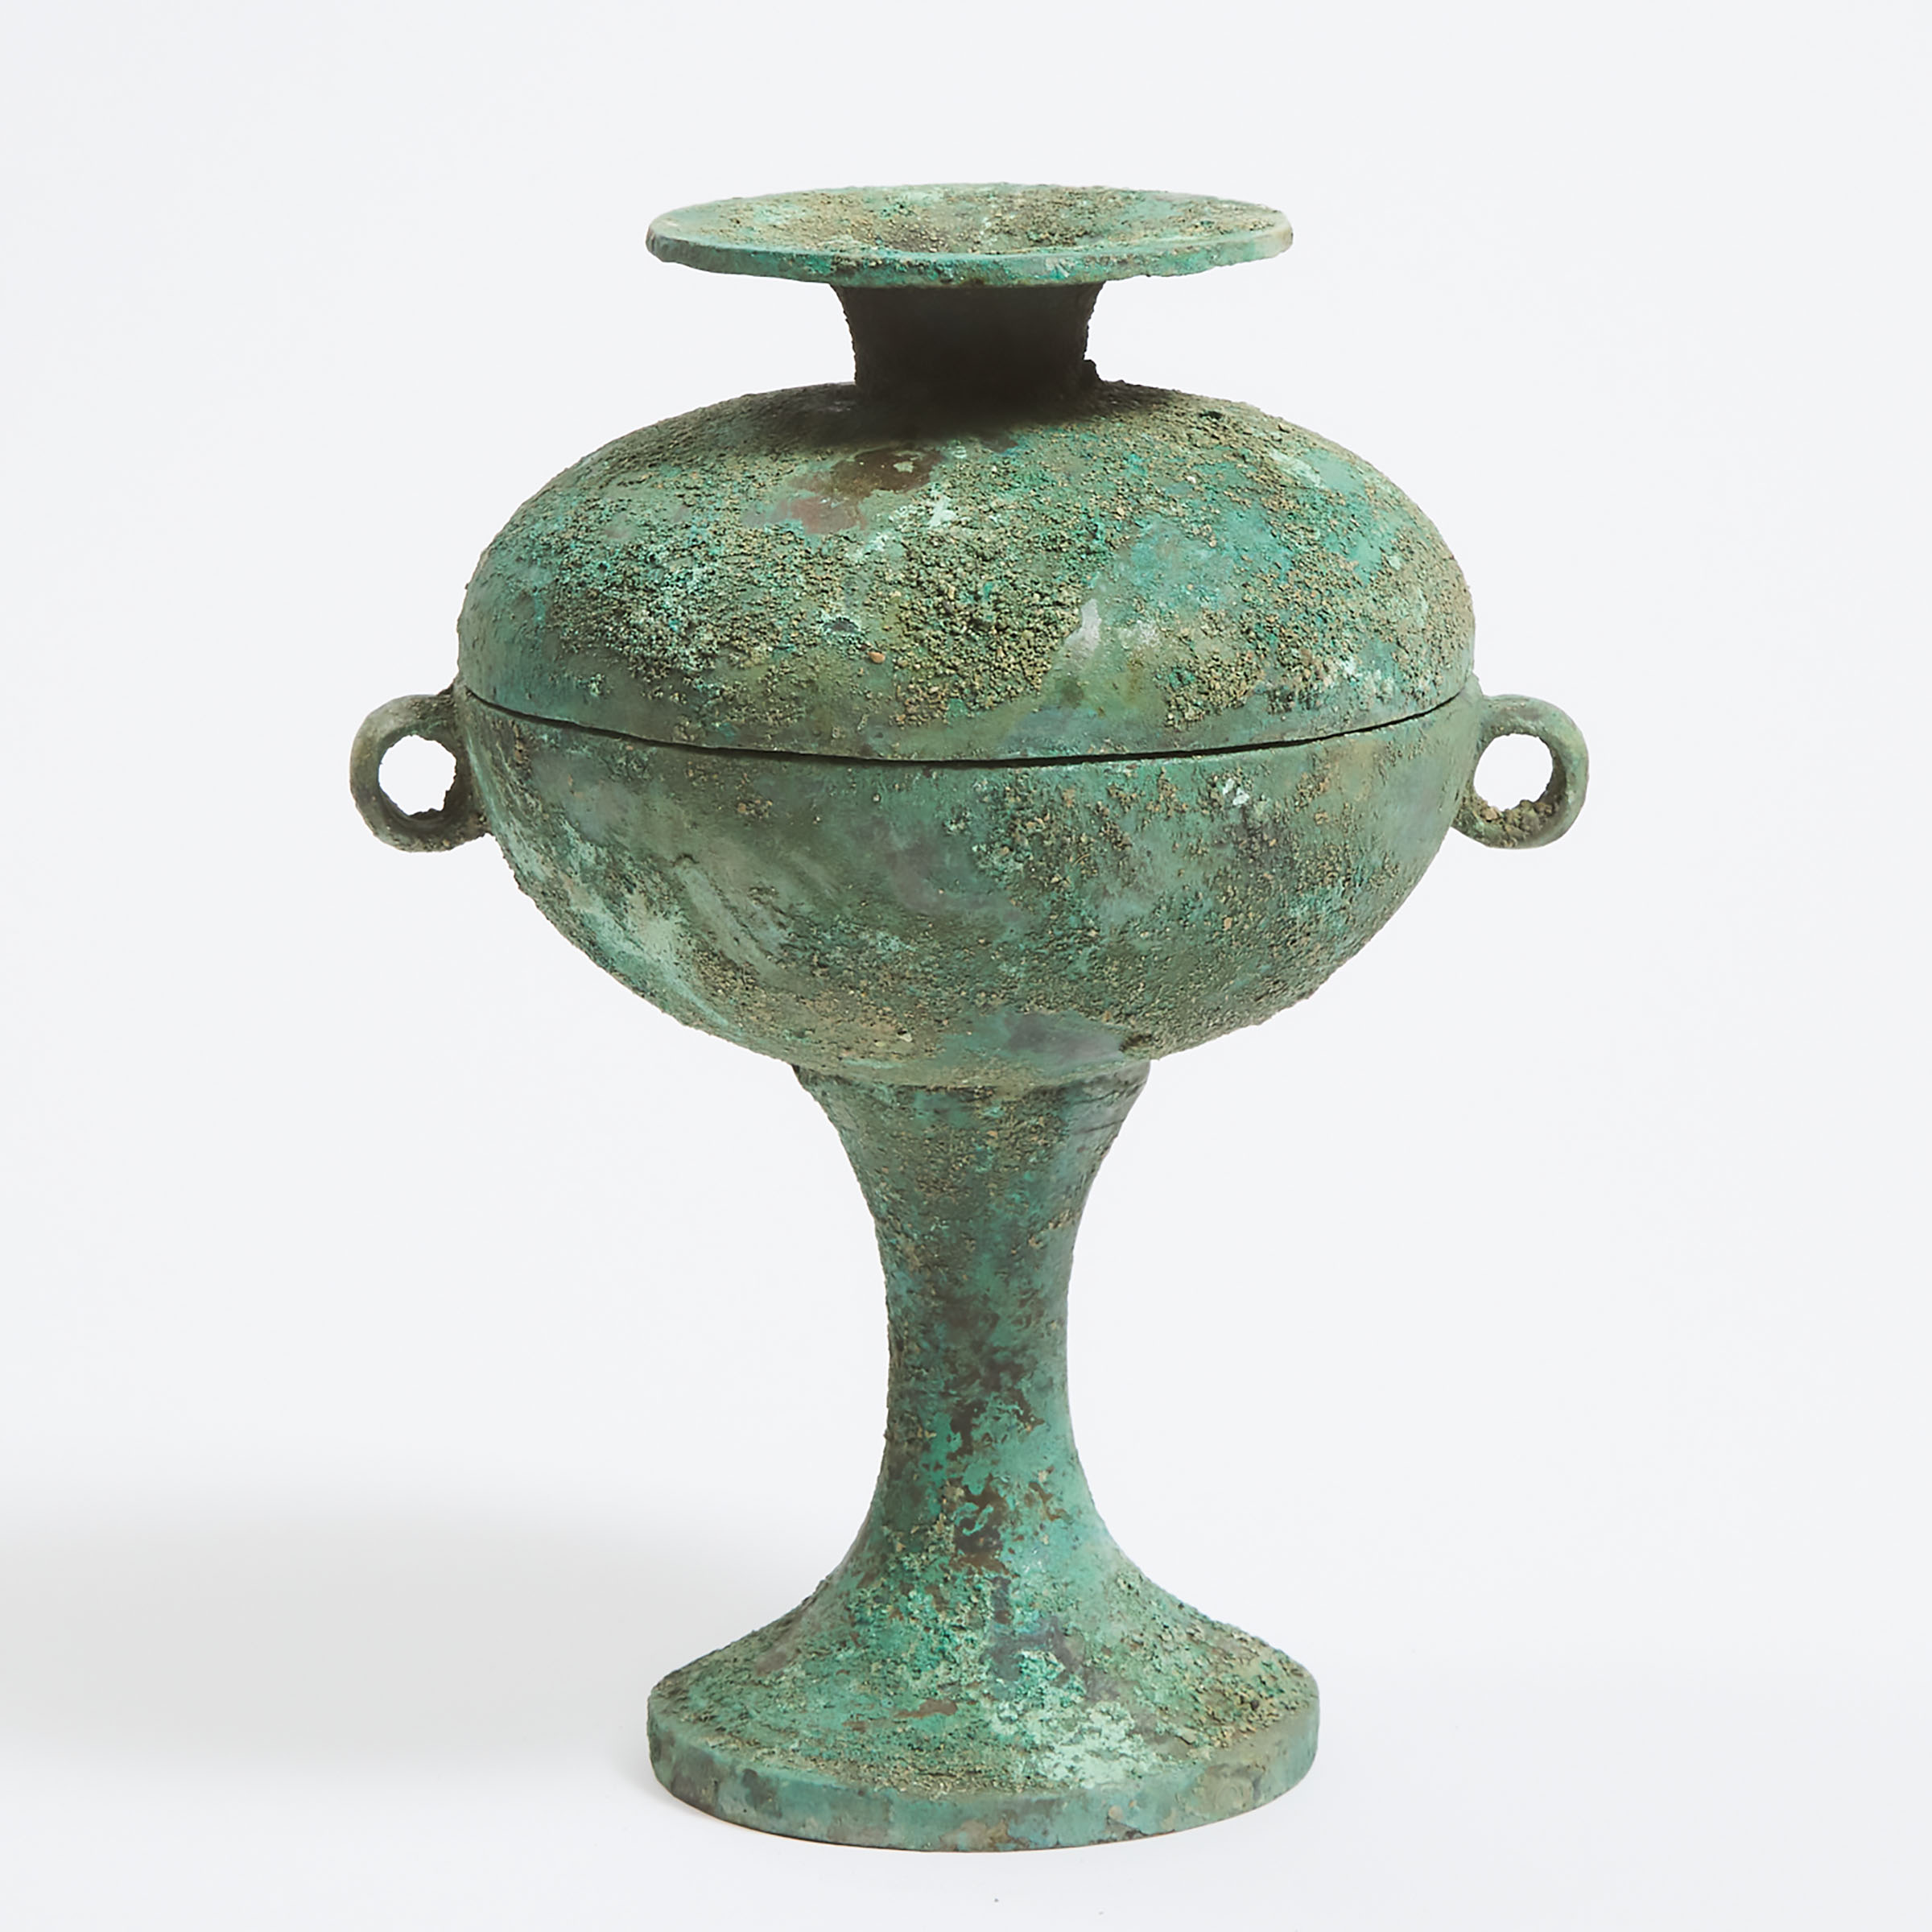 An Official Palace Museum Replica of a Bronze Ritual Food Vessel and Cover, Dou